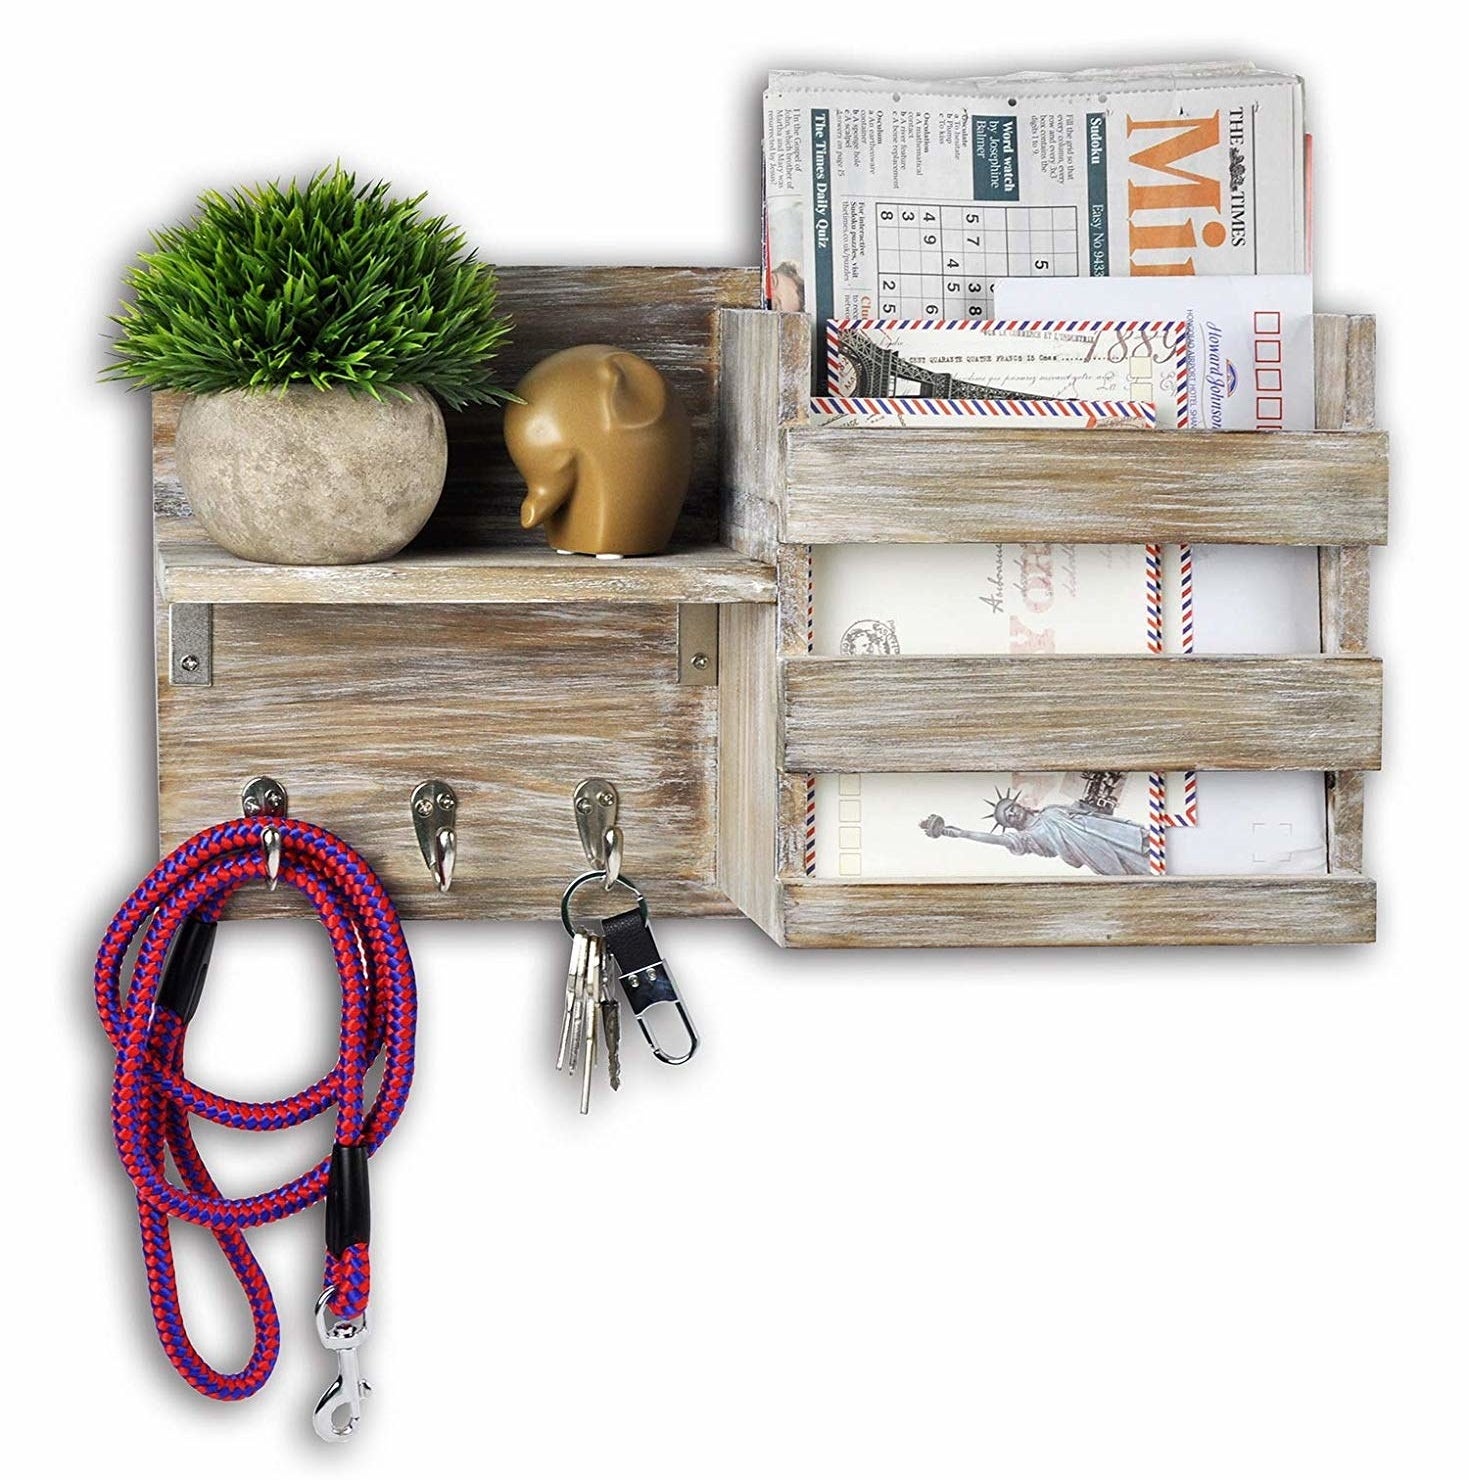 a stock image of the mail and key organizer holding various items